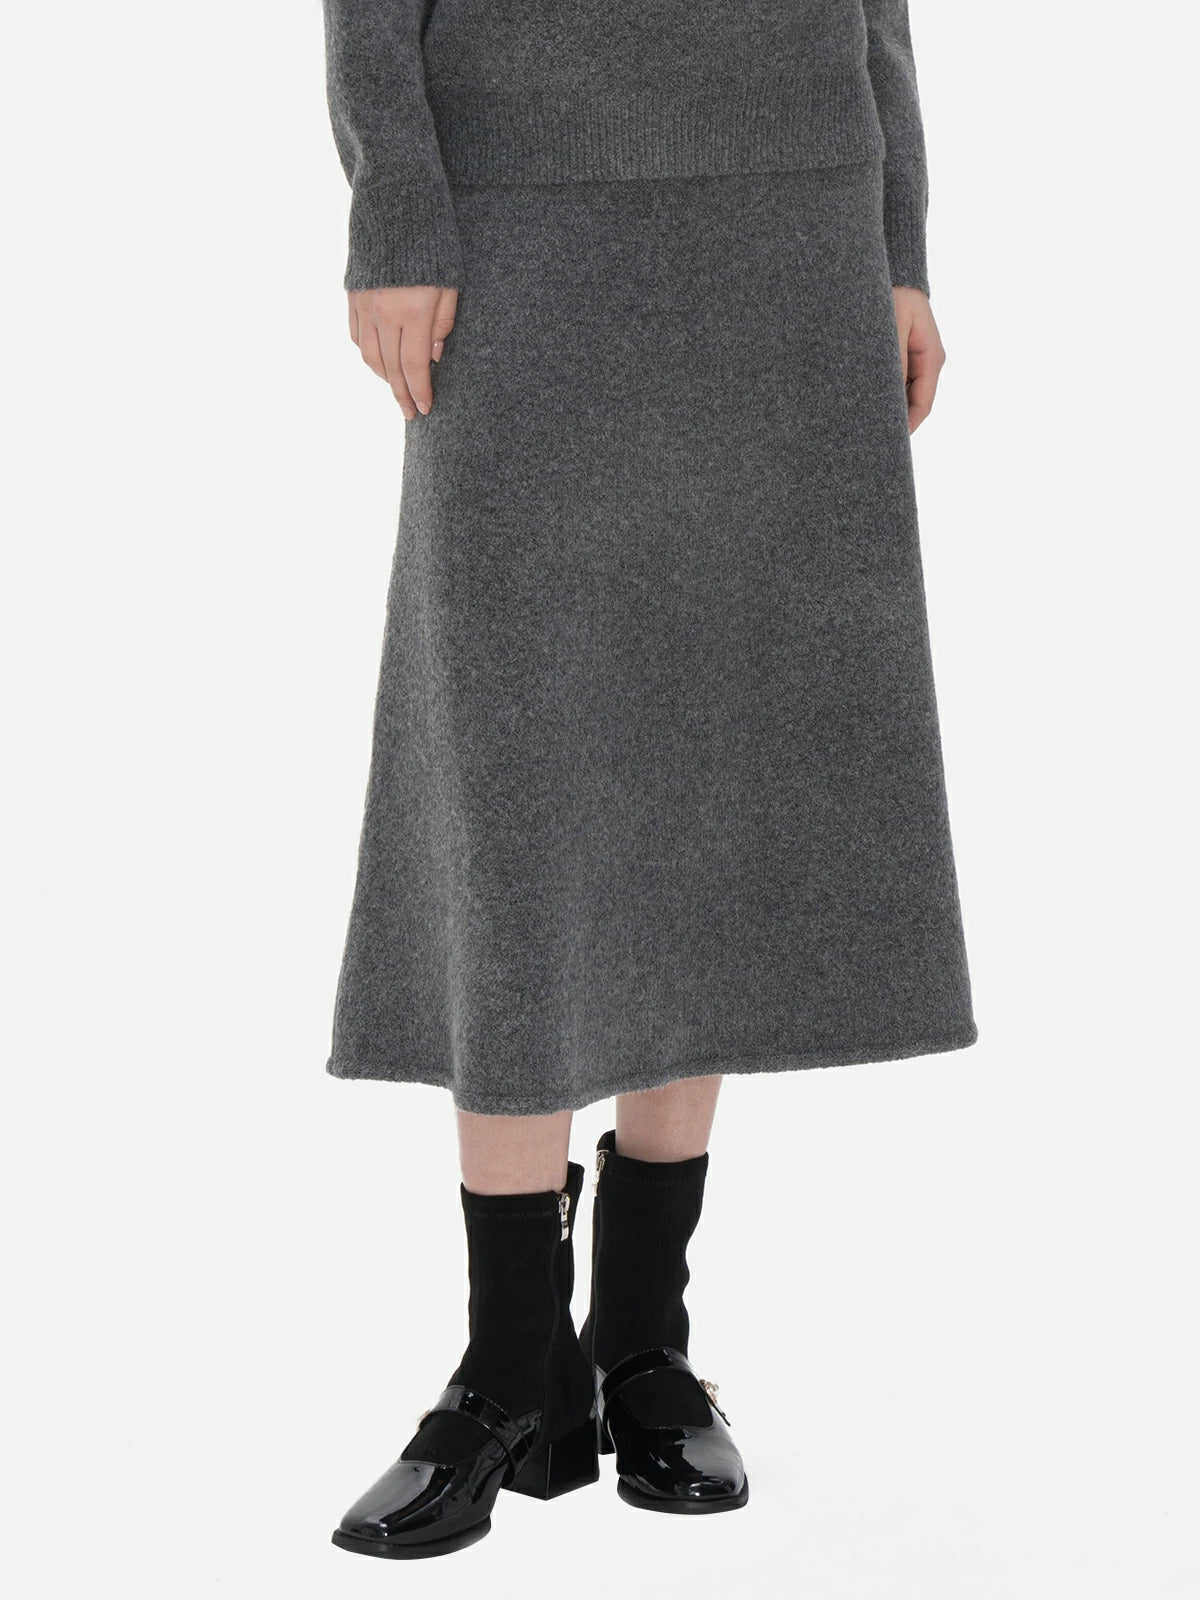 Discover the comfort and style of this casual elastic high-waist A-line midi skirt.